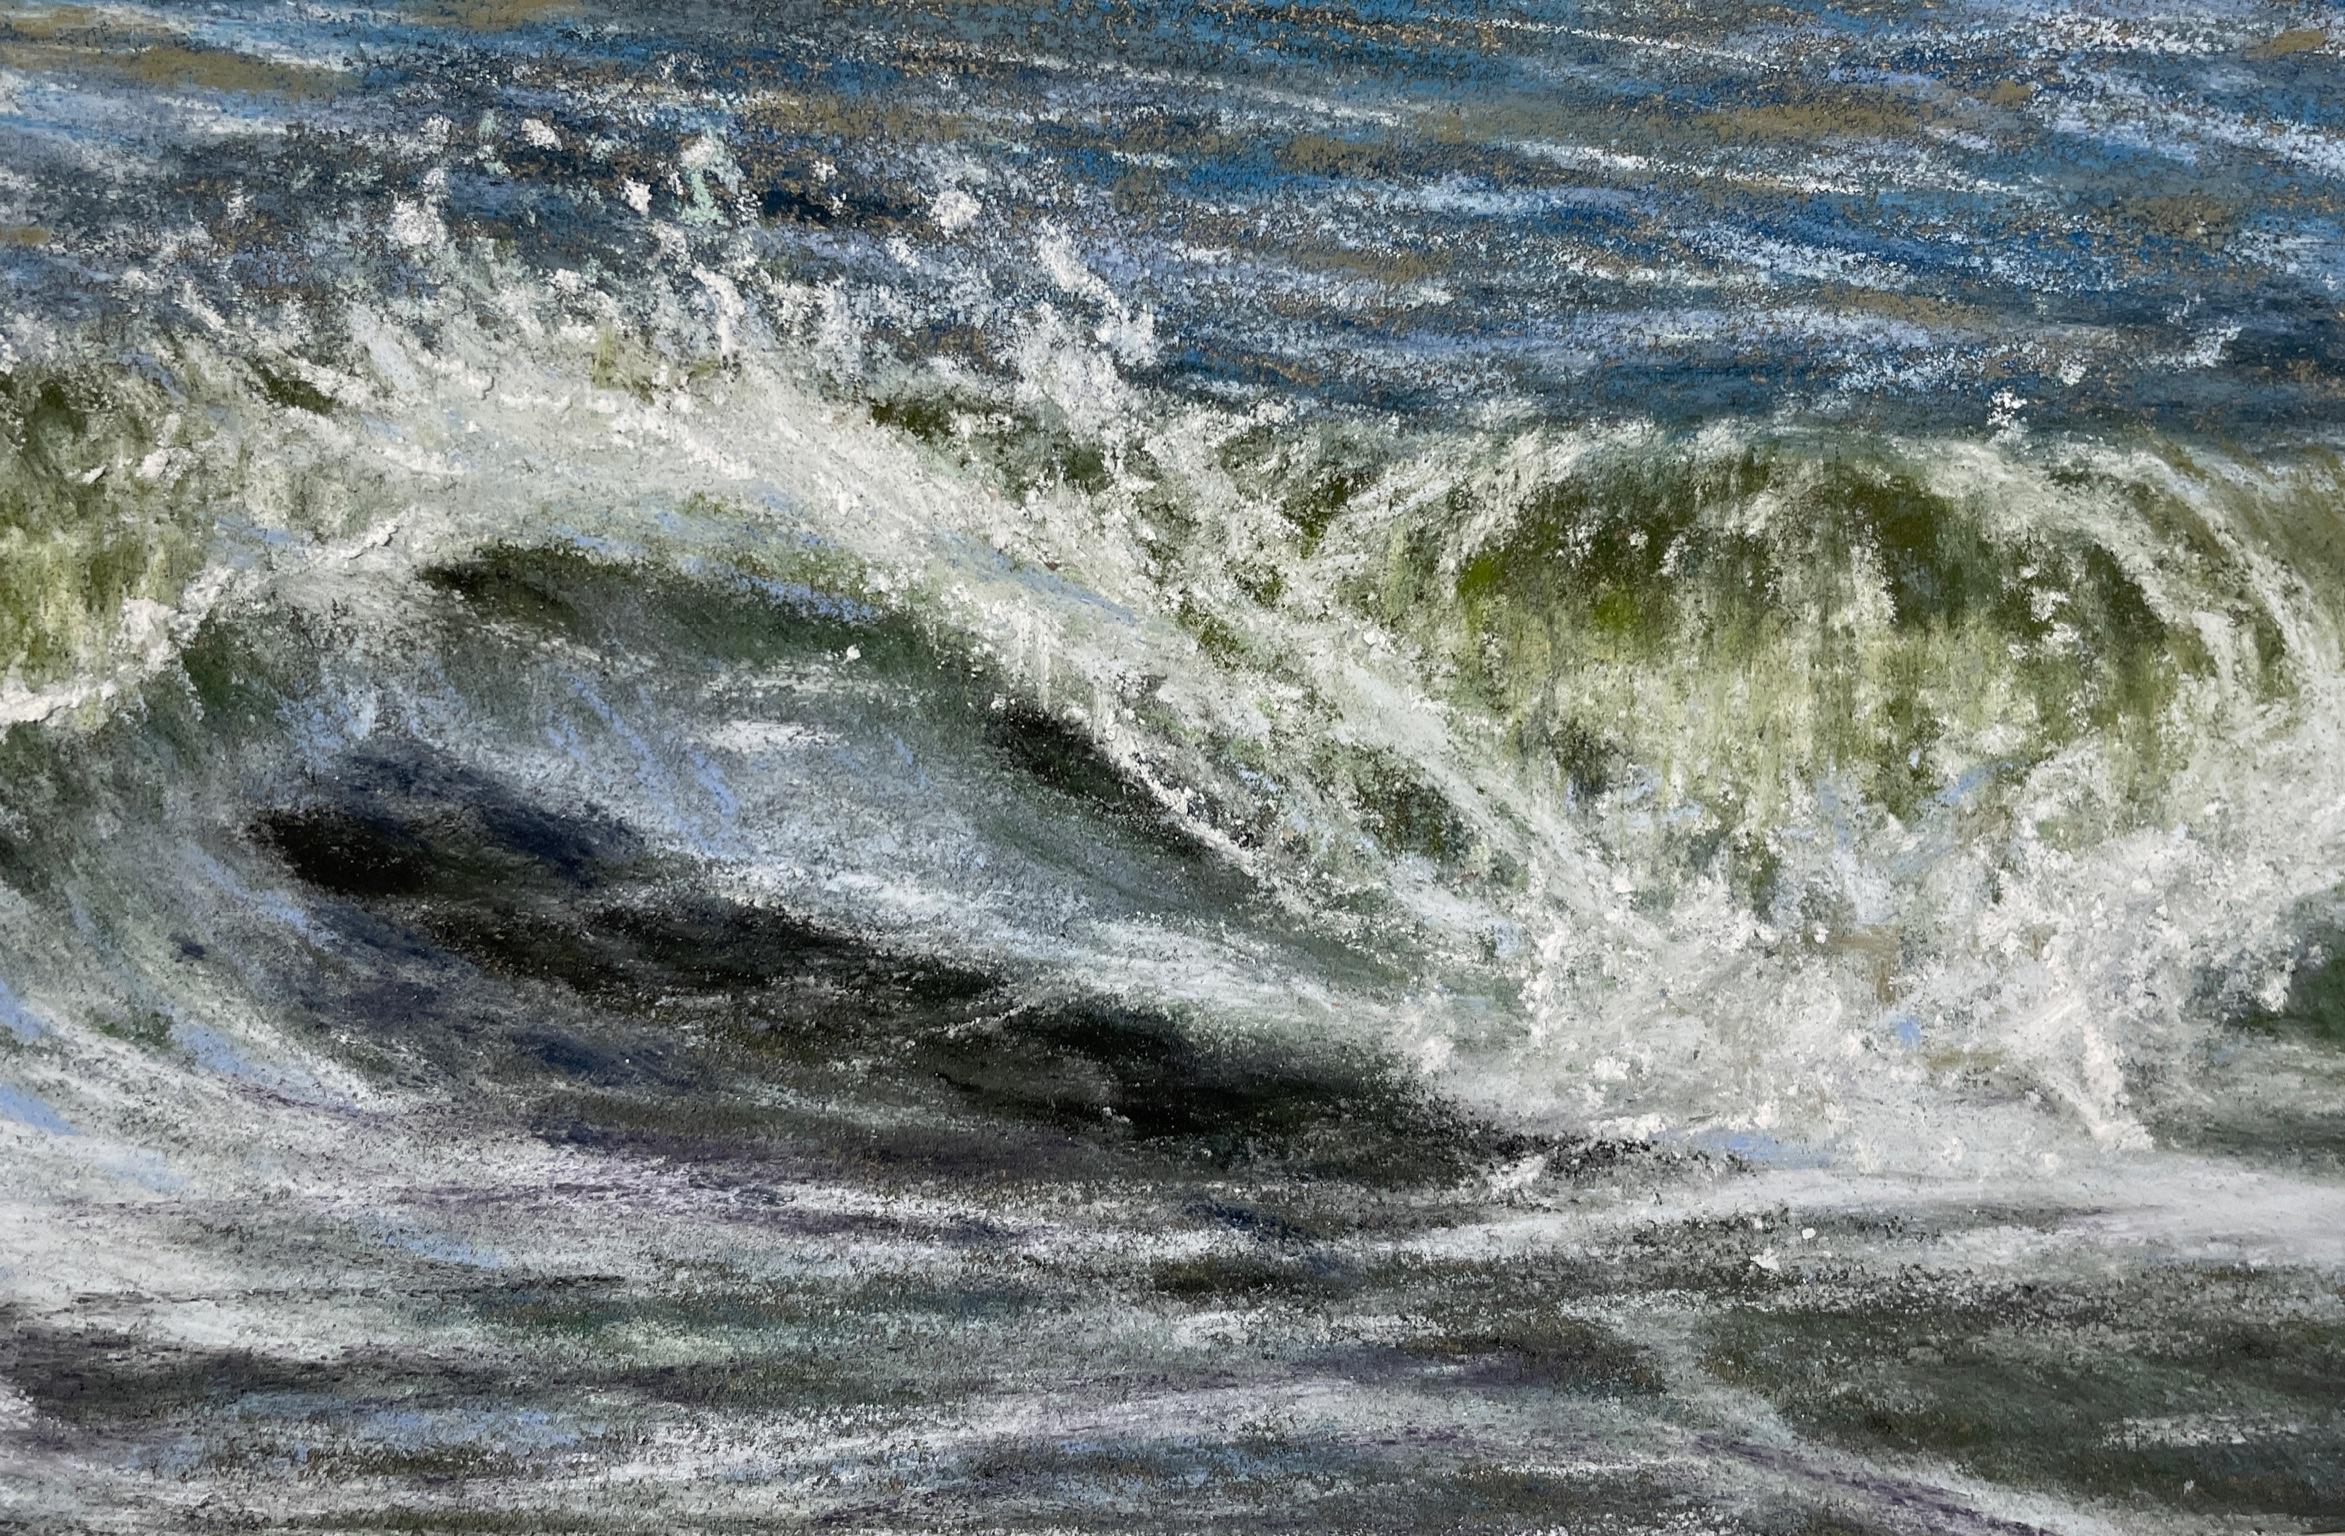 Elena Degenhardt's "Ocean I" is a poignant representation of the relentless and eternal spirit of the sea. Crafted in 2022, this exquisite original artwork measures 4 x 6 inches, rendered in soft pastel on paper, and comes elegantly framed in a